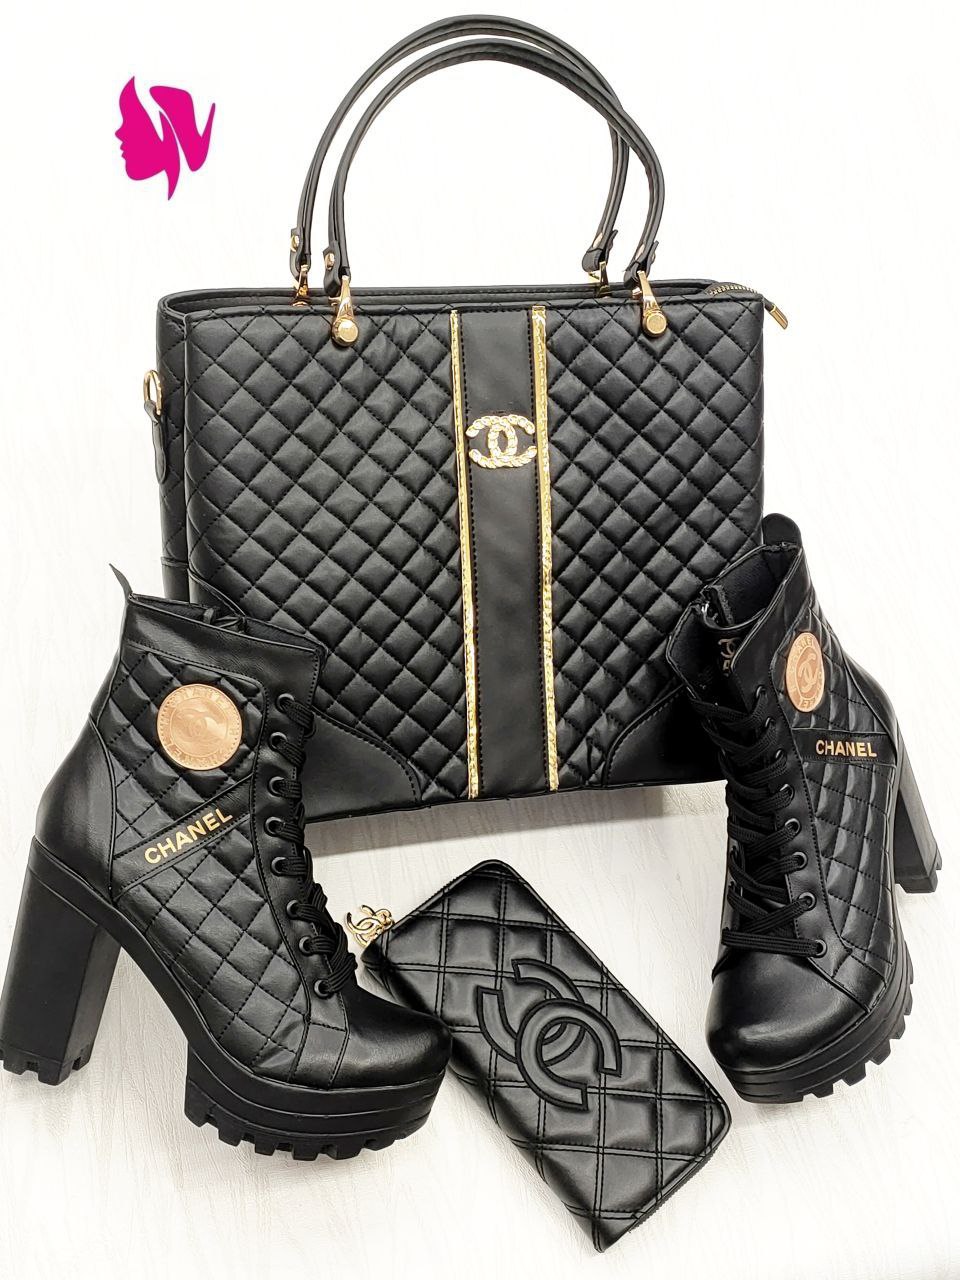 Chanel winter boots and handbags and wallet